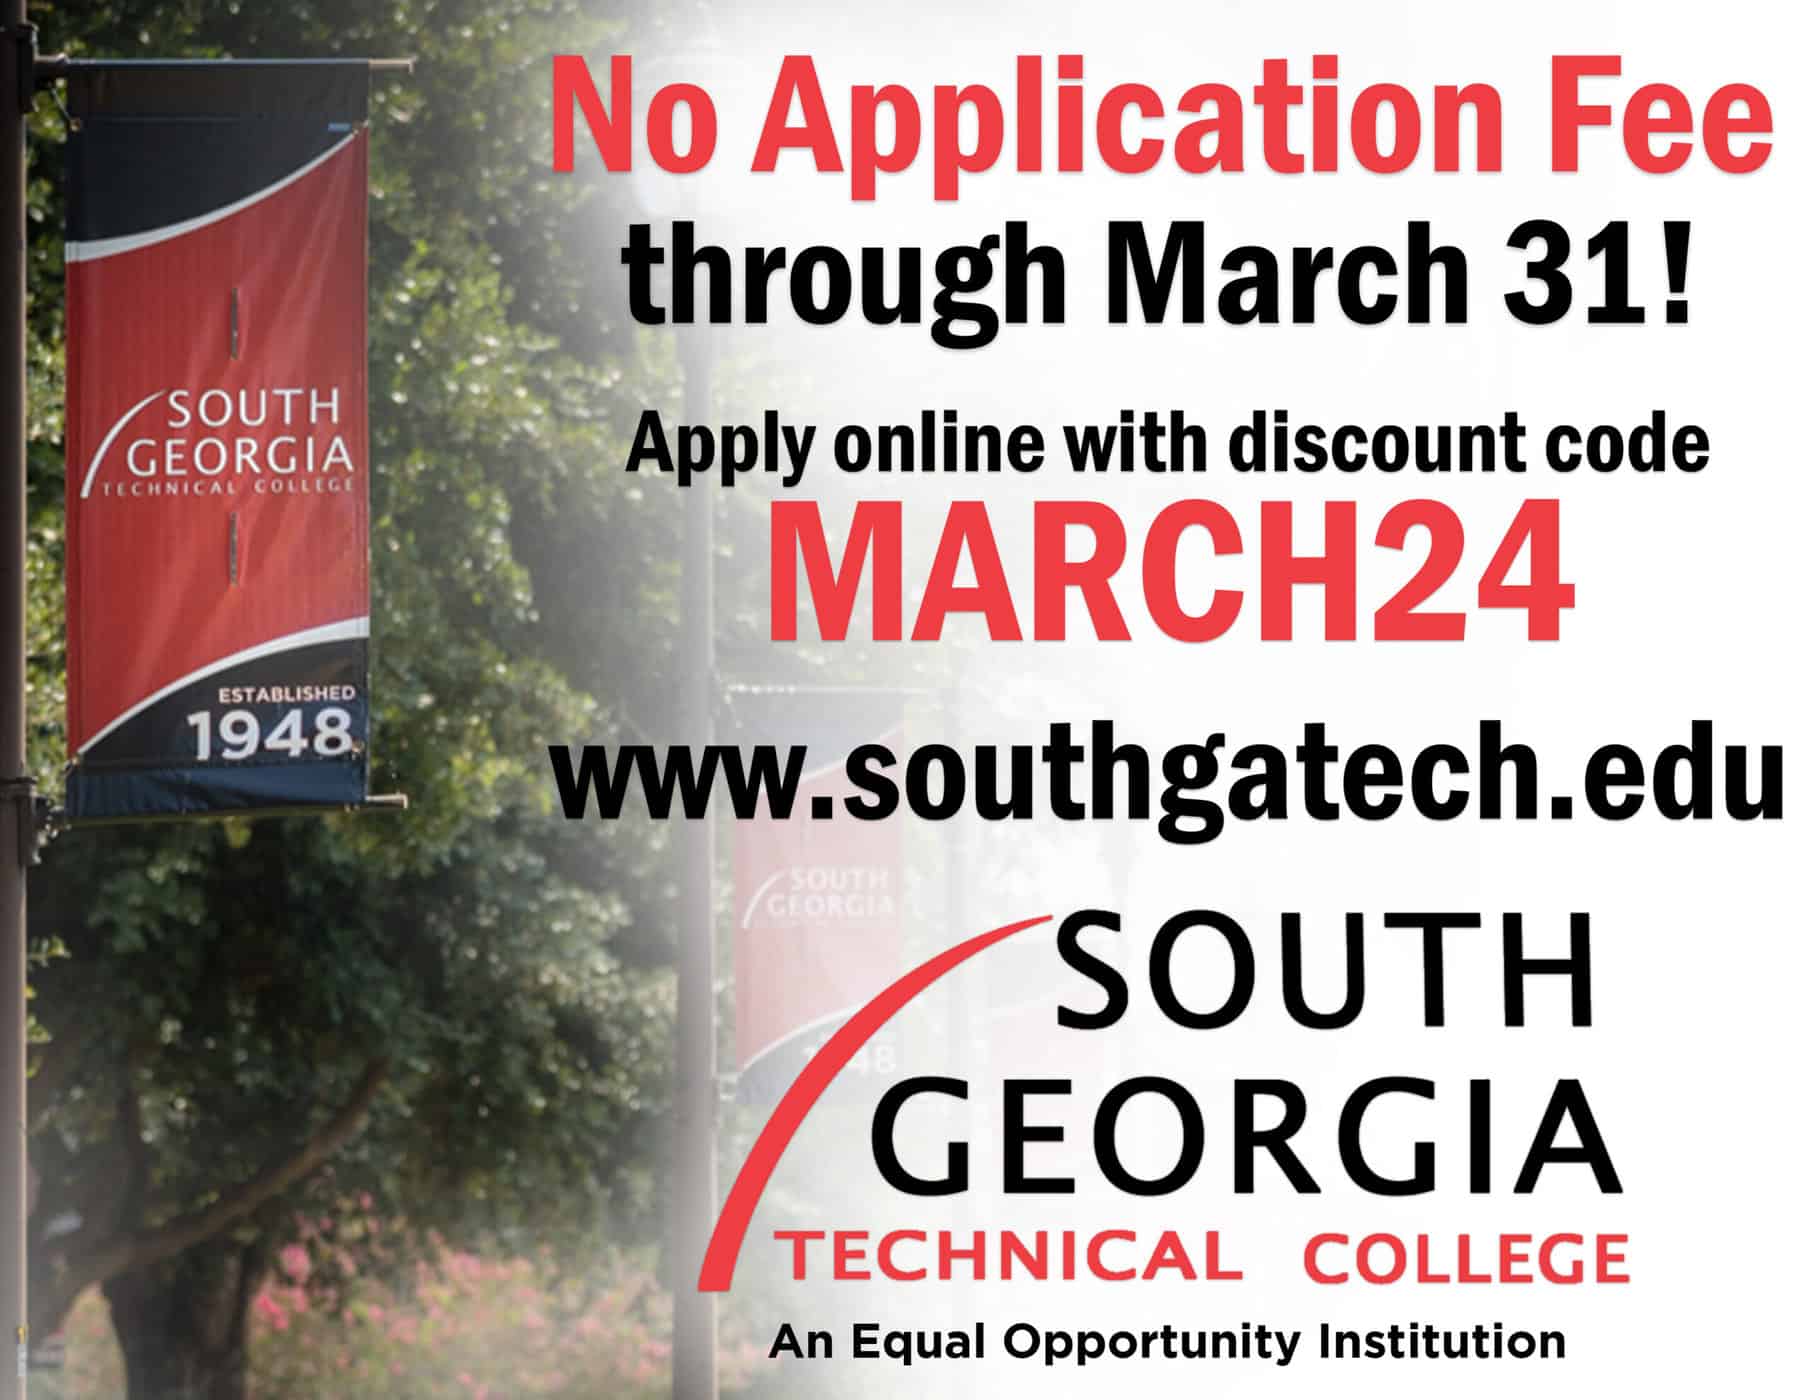 March is Free Application Fee Month at South Georgia Technical College.